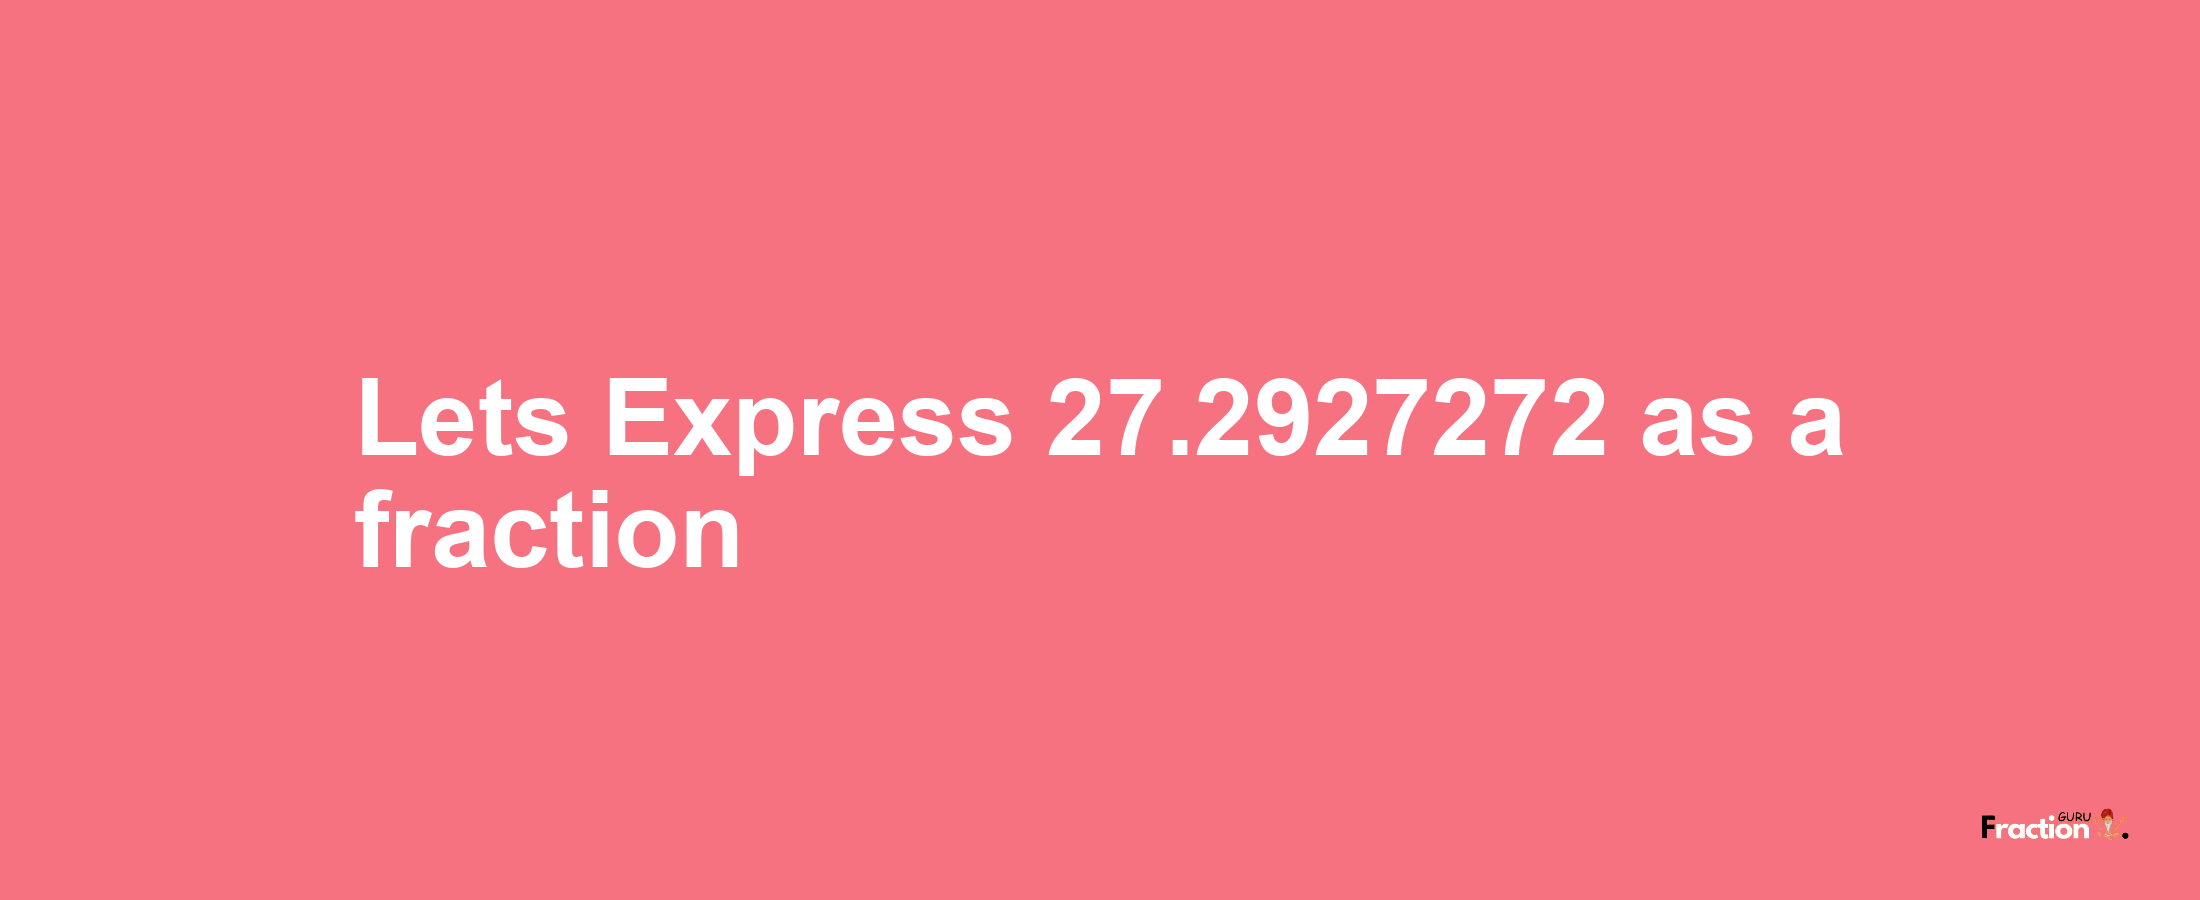 Lets Express 27.2927272 as afraction